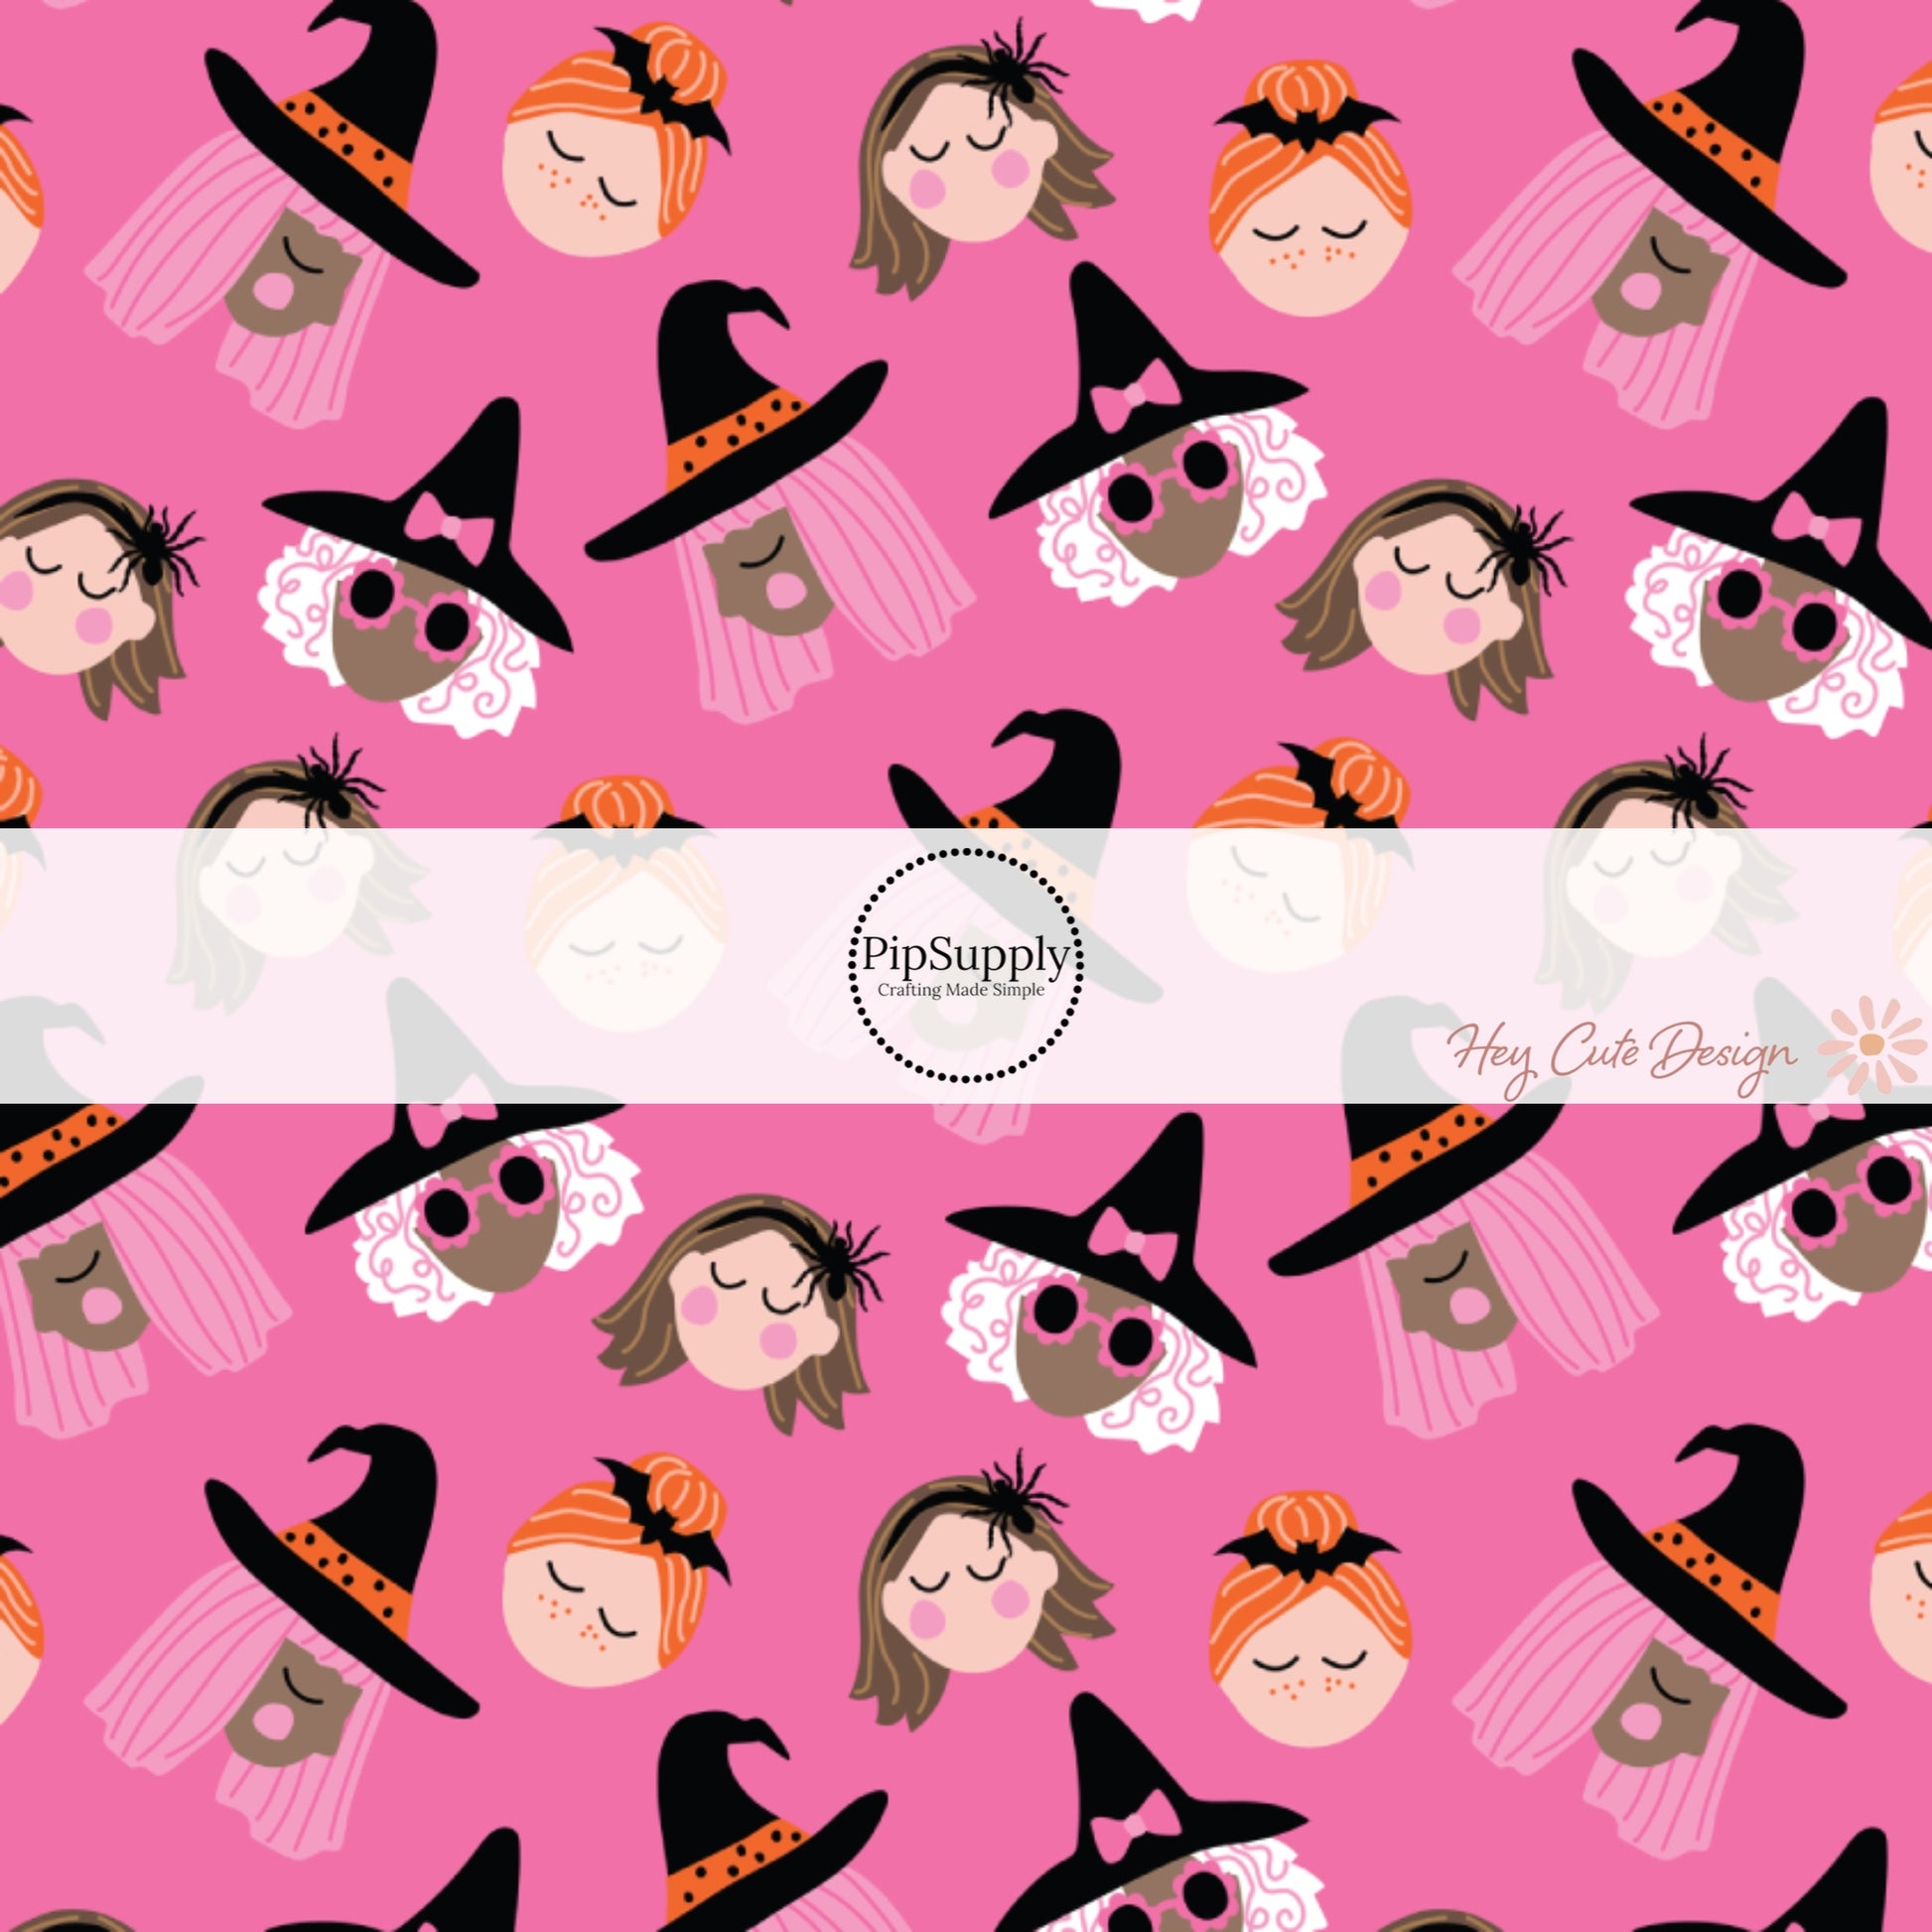 These Halloween themed pink fabric by the yard features kind witches on hot pink. This fun spooky themed fabric can be used for all your sewing and crafting needs! 